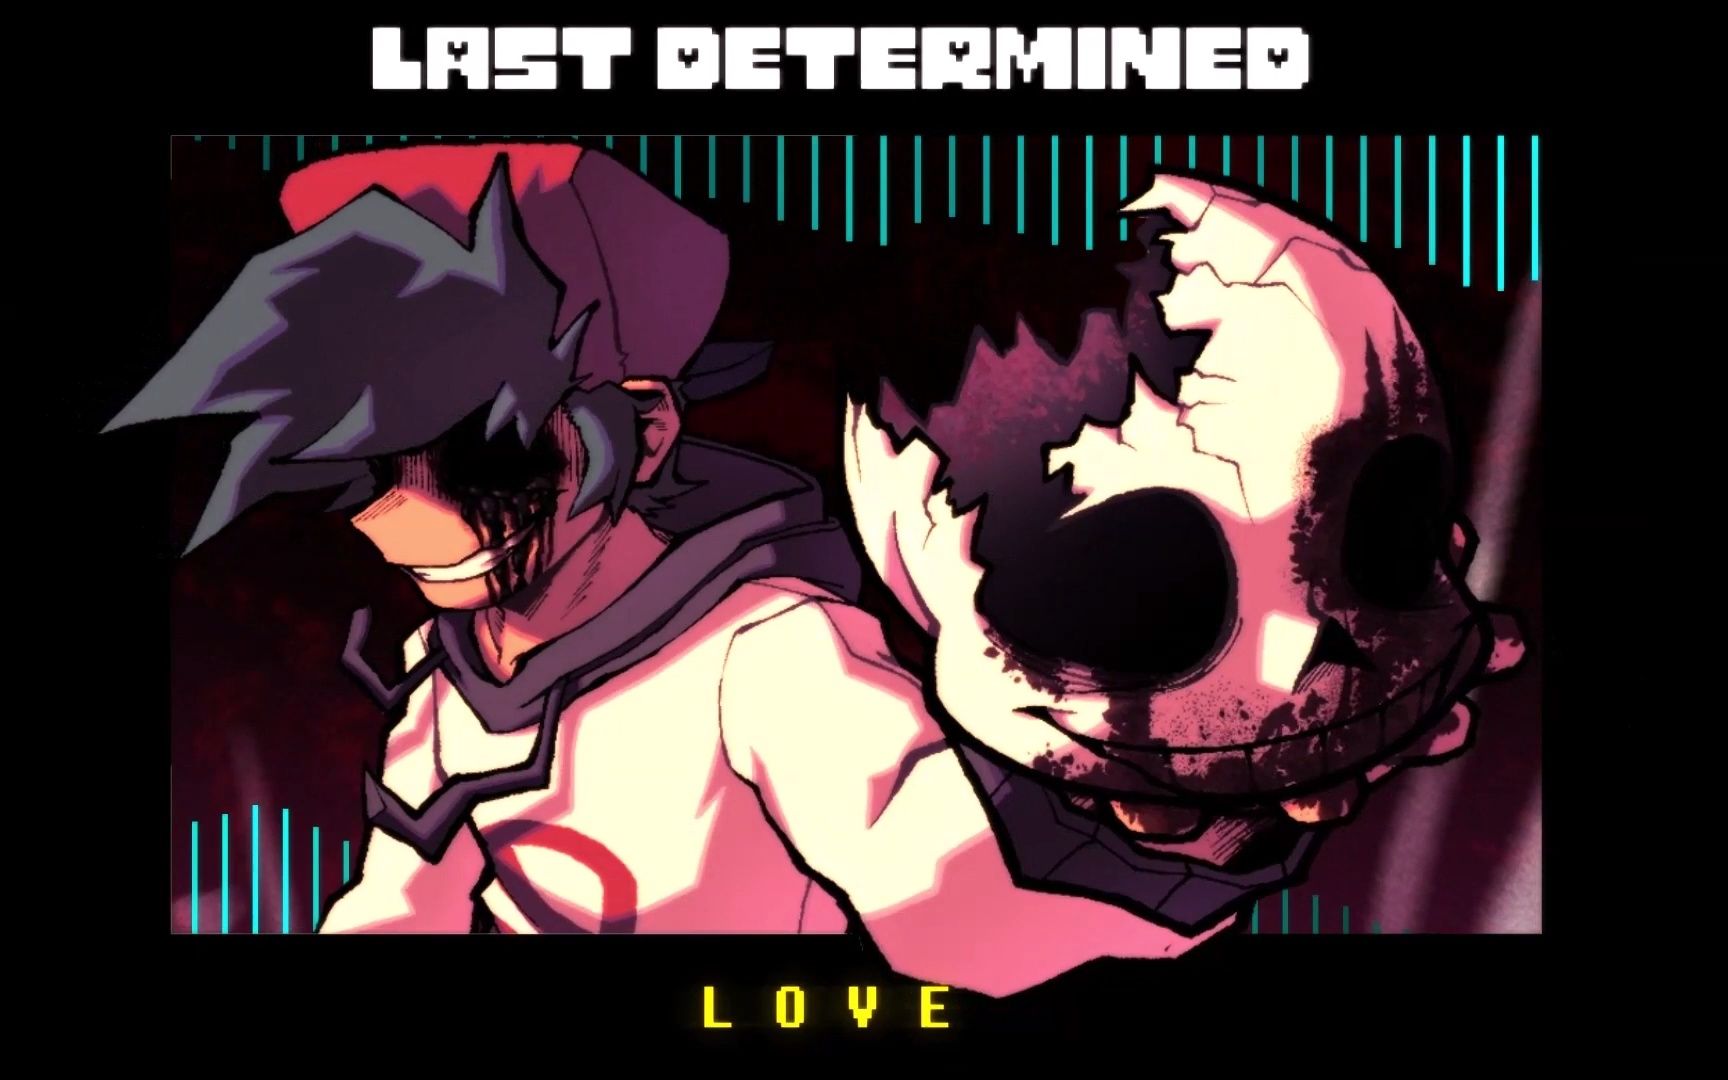 【FNF】模组 Last Determined 曲子泄露（简介）